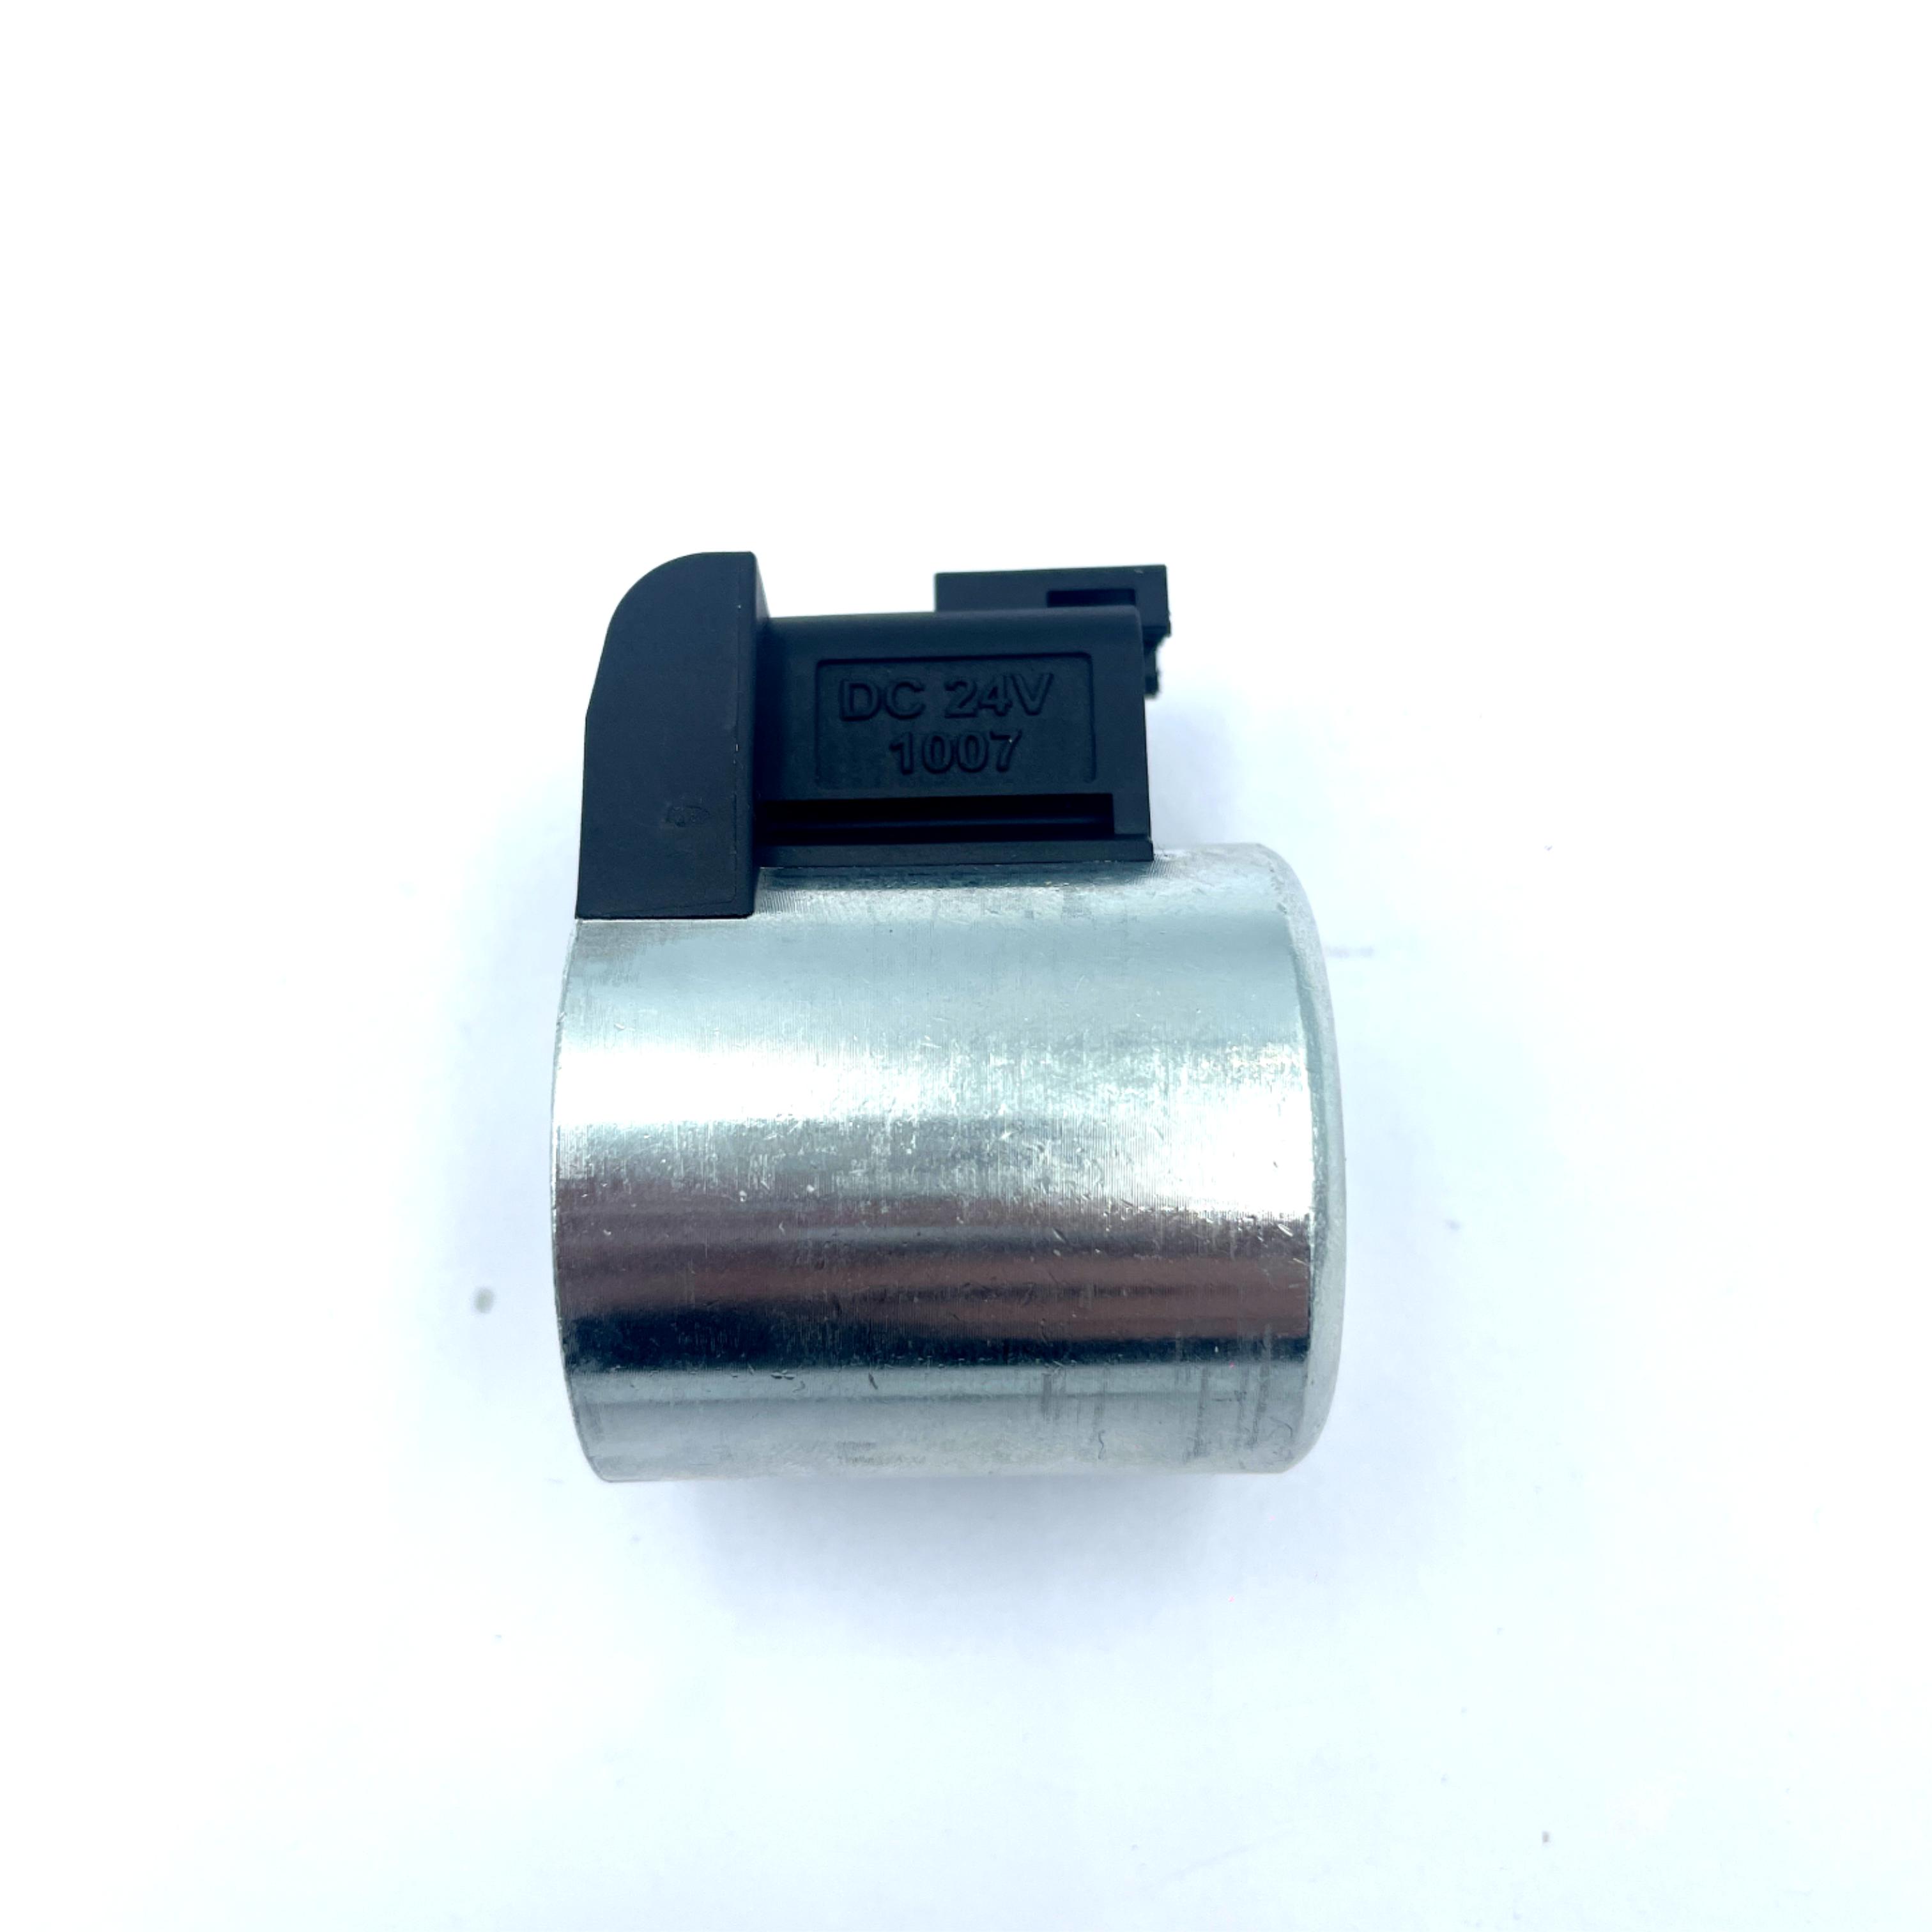 Excavator coil Hydraulic coil solenoid والو coil hole 17.6mm اوچائي 40mm